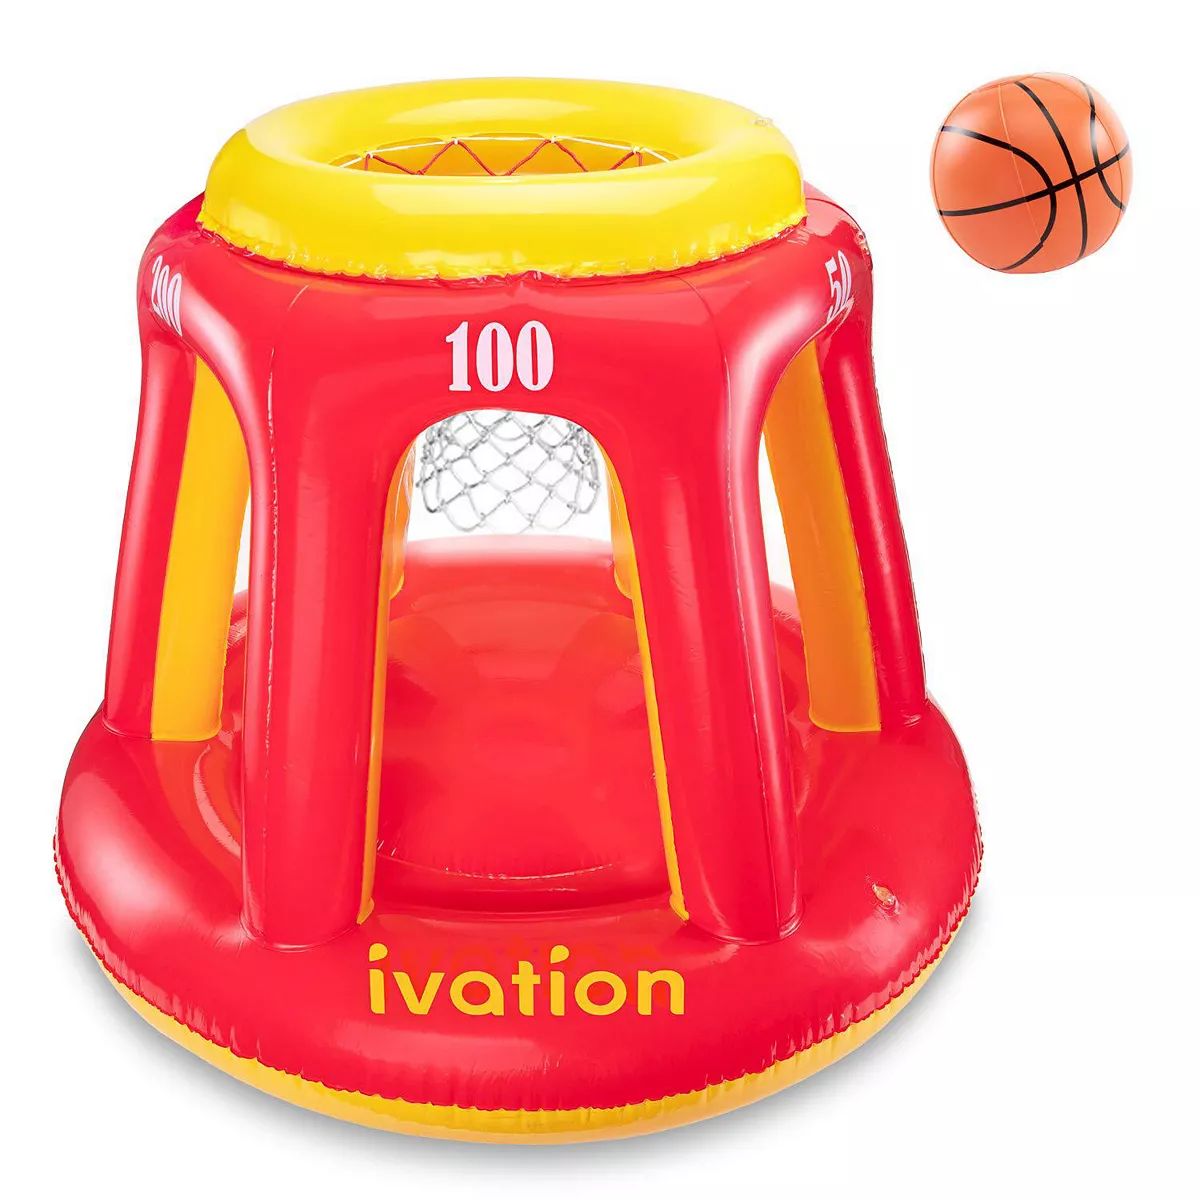 Ivation Inflatable Floating Pool Toy, Hoop & Ball for Swimming Pool, Red & Yellow | Kohl's